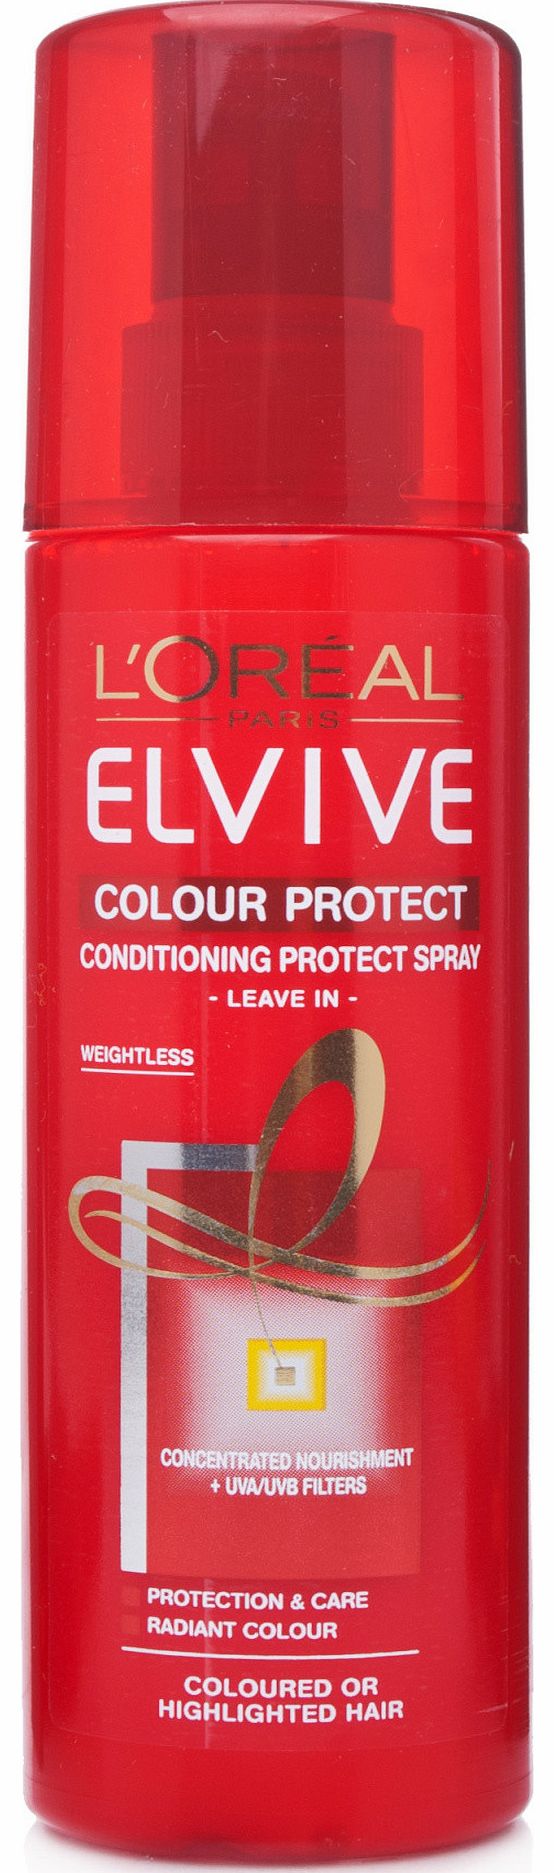 L'Oreal Elvive Colour Protect Leave-In